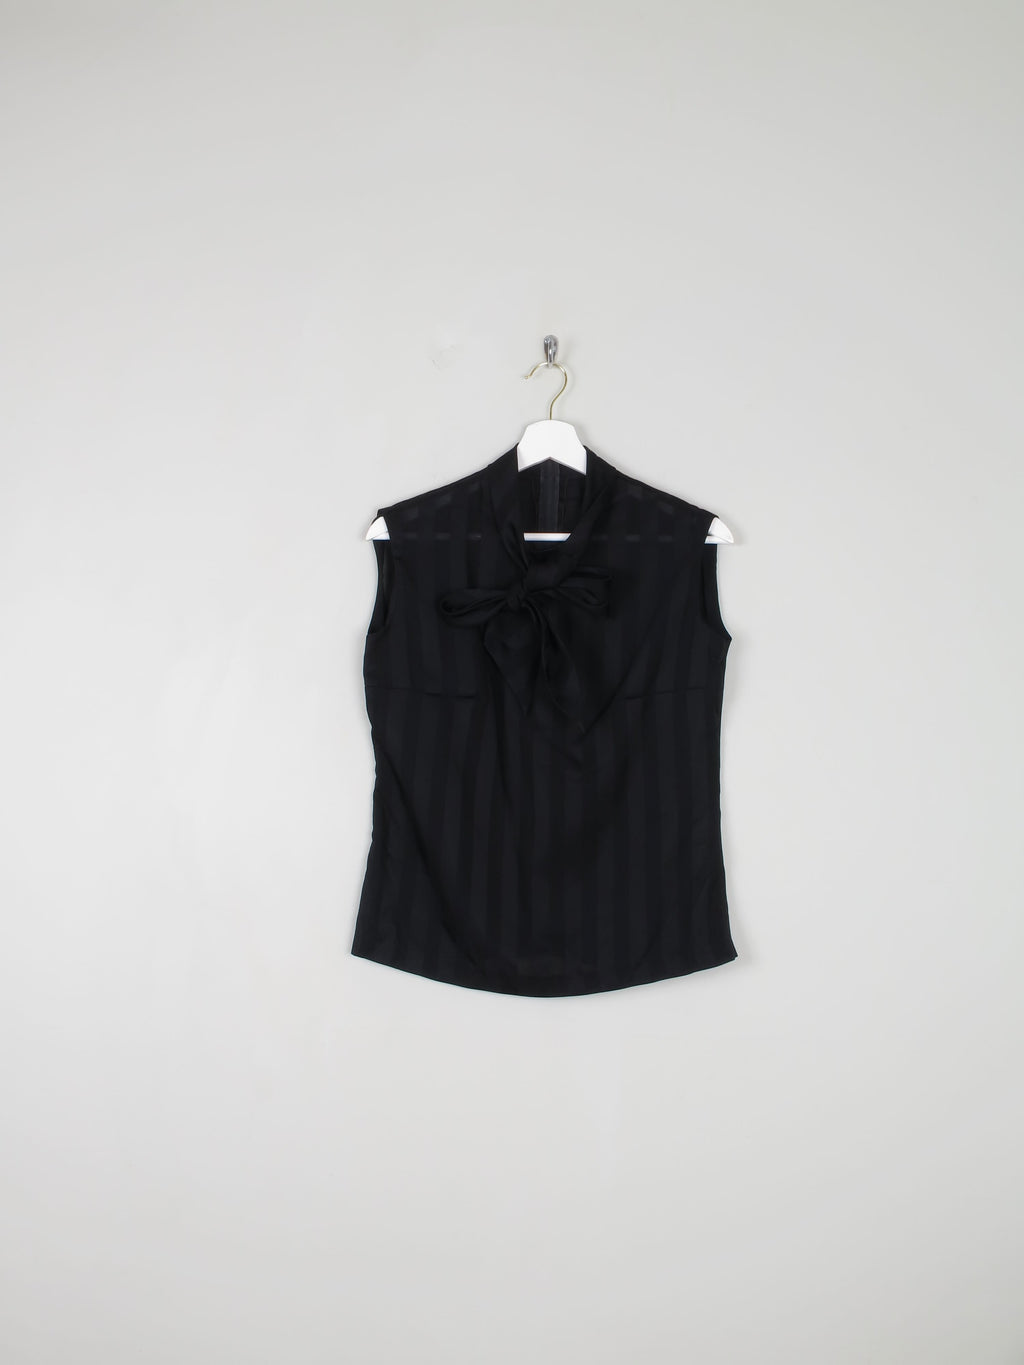 Women's Vintage Black Blouse With Tie Neck S - The Harlequin